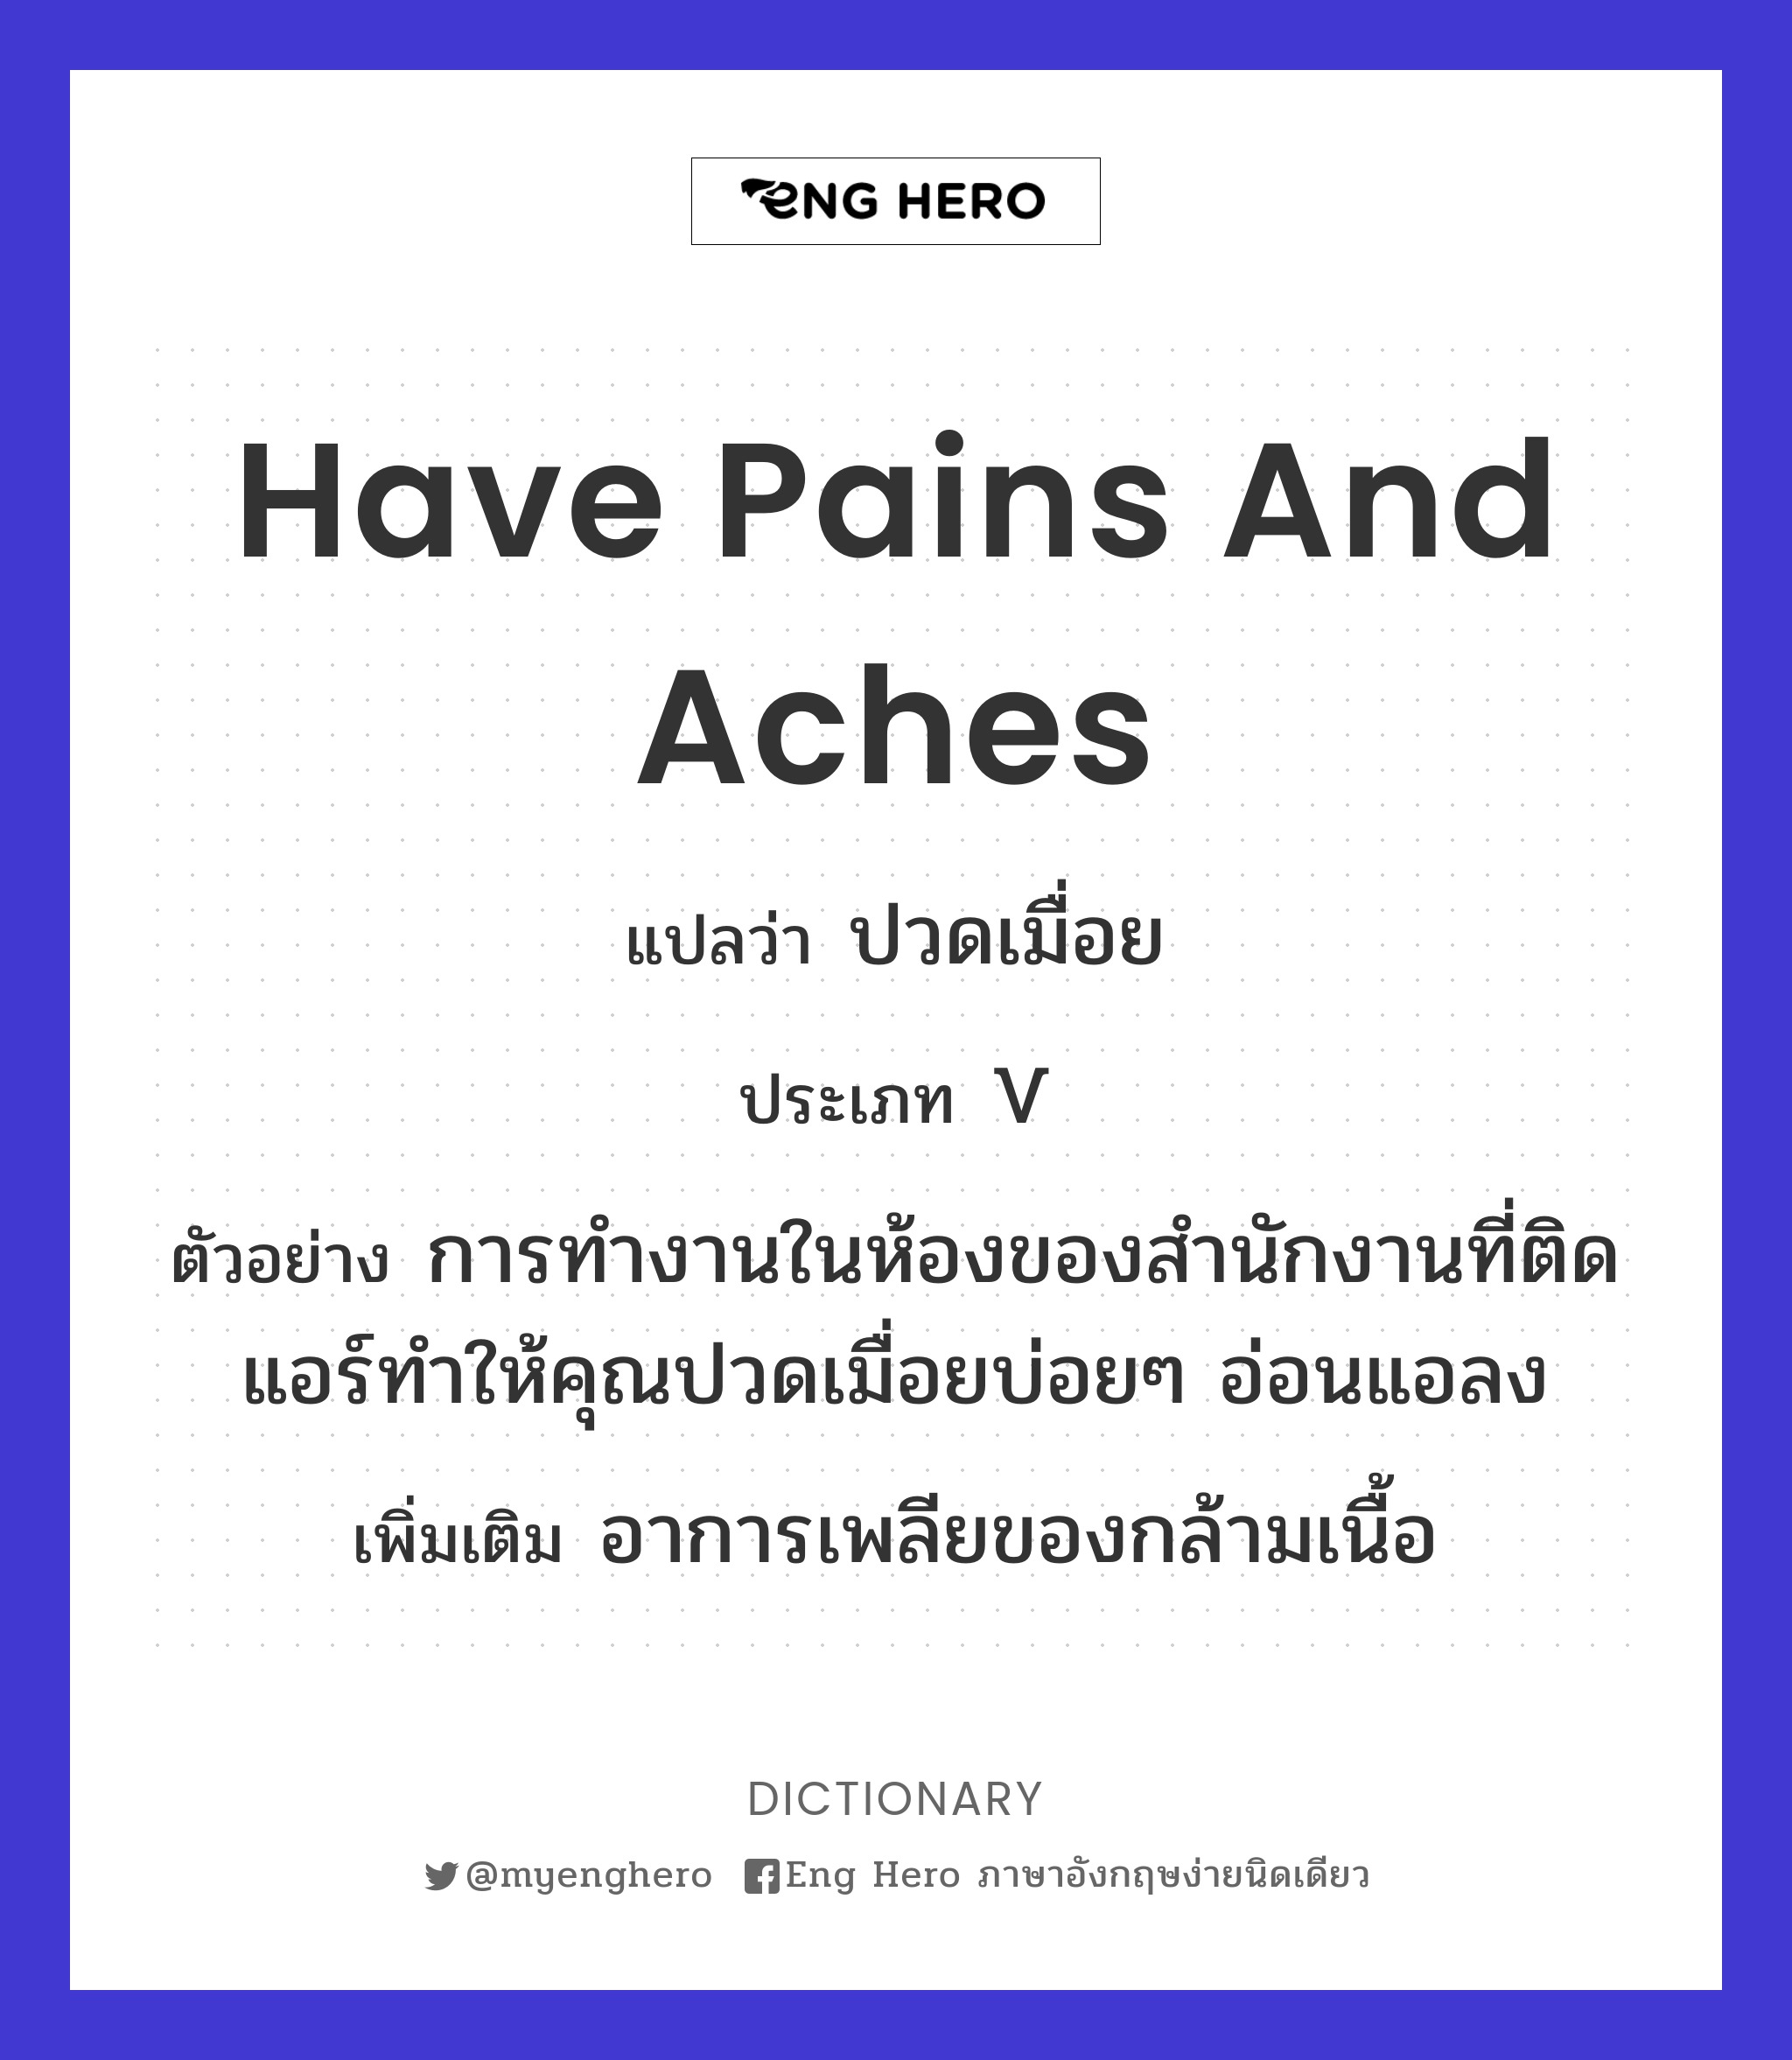 have pains and aches